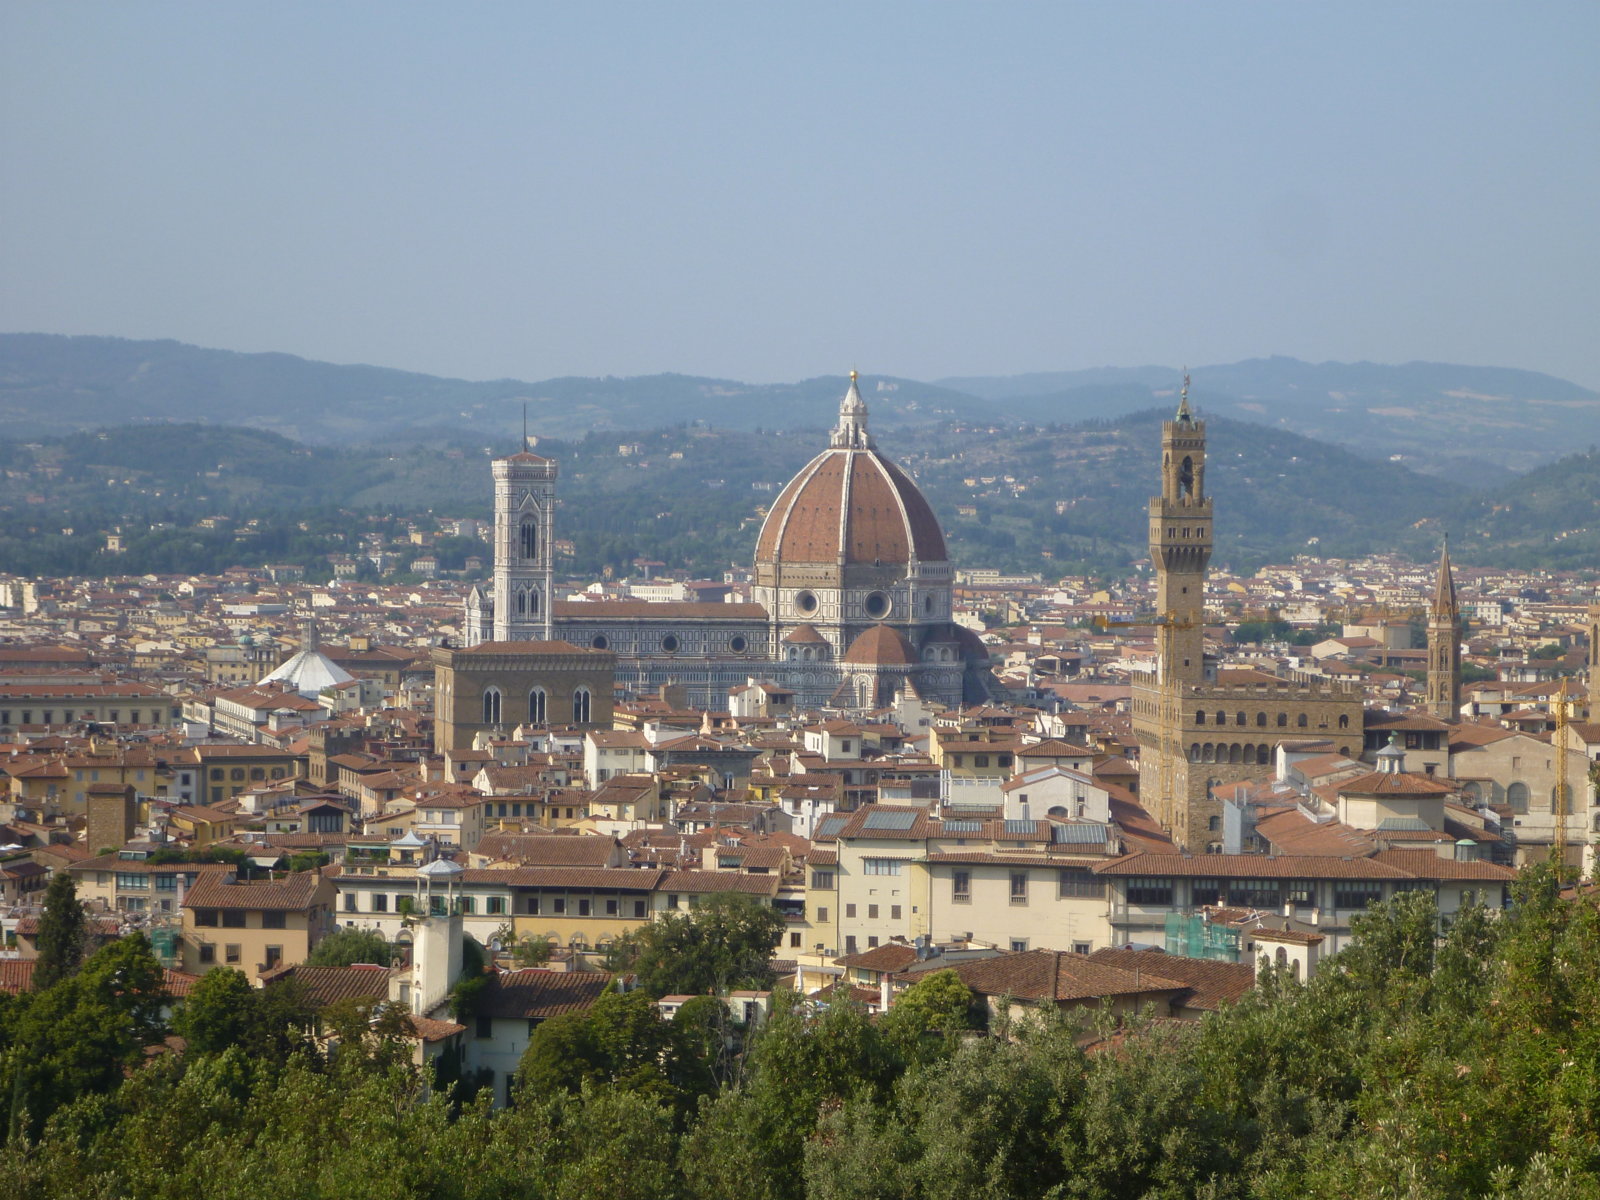 Il Duomo seen from Ft Belvedere